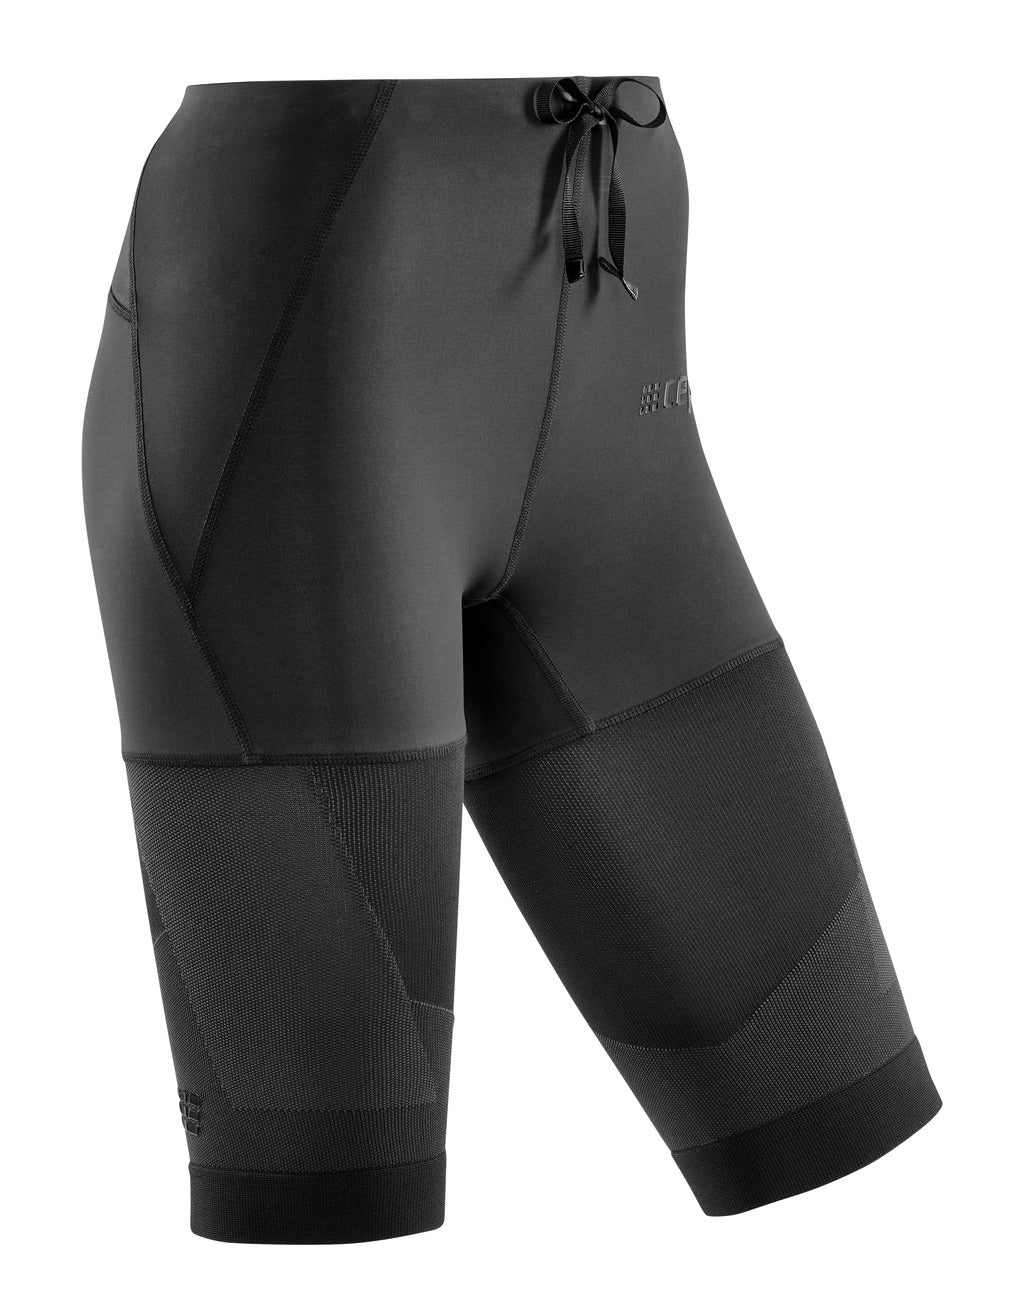 Women's Compression Travel Clothes  Airplane Travel Outfits – CEP  Compression